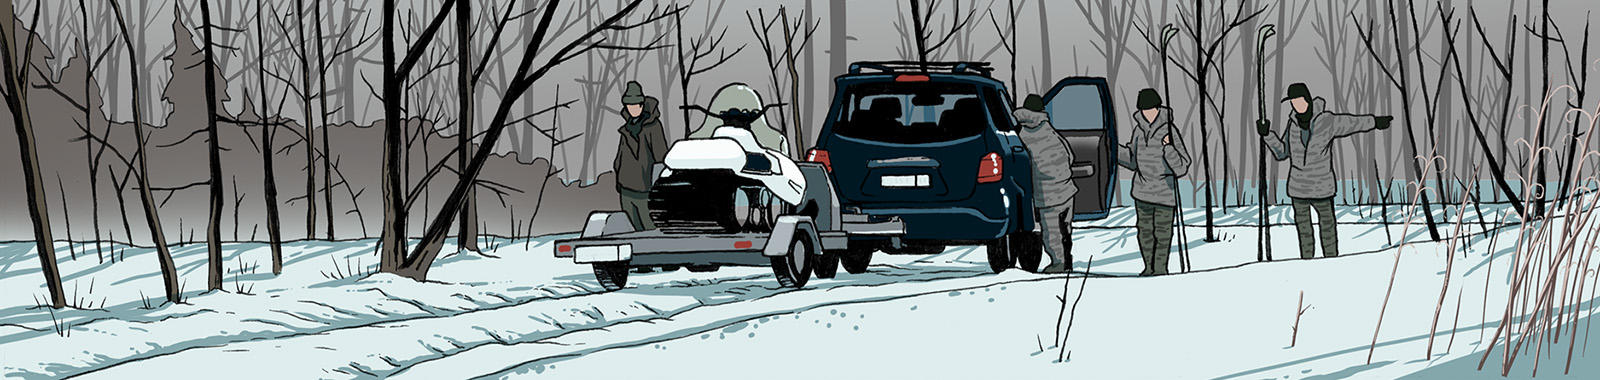 Illustration of researchers getting out of a car in a snowy Russian landscape to investigate an Amur tiger.